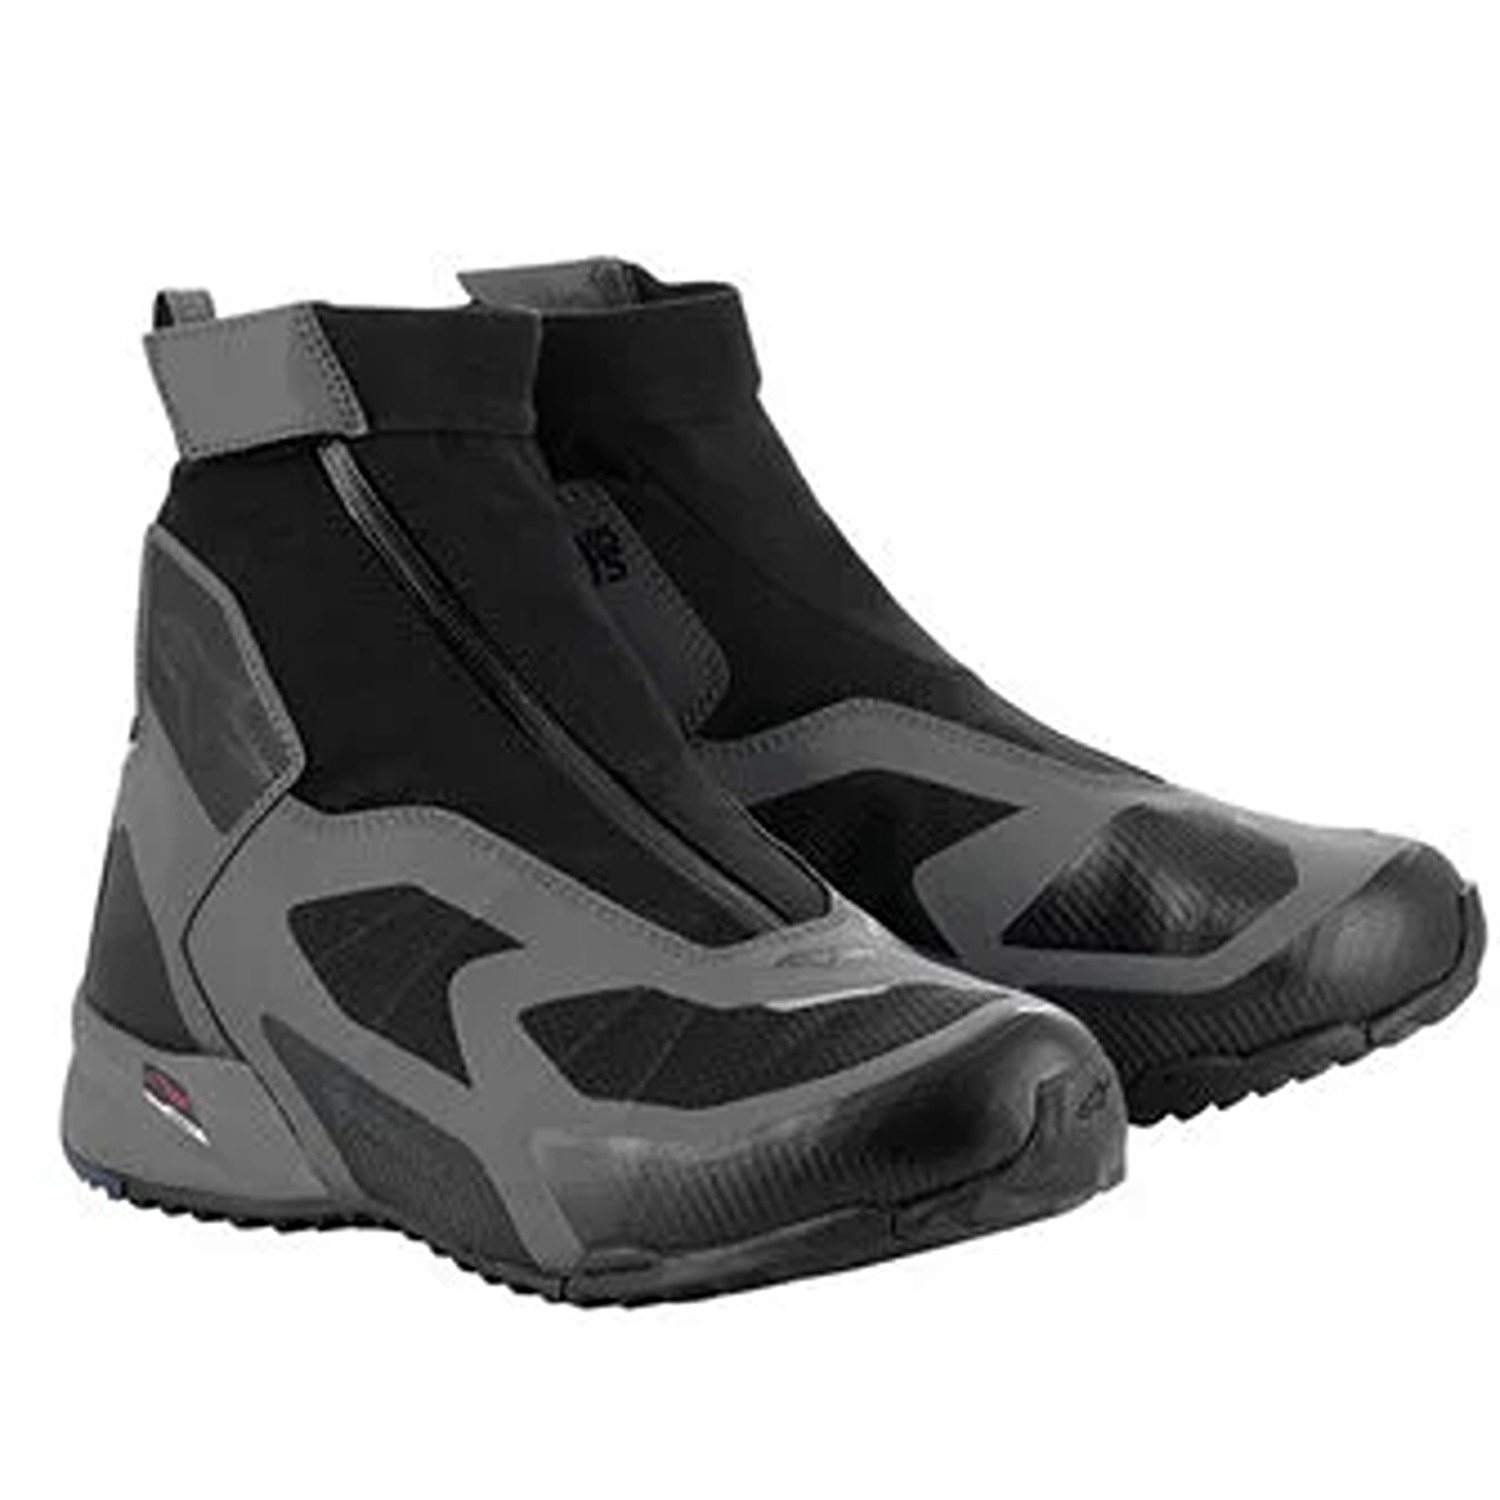 Image of Alpinestars CR-8 Gore-Tex Shoes Black Mid Gray Bright Red Size US 14 ID 8059347260273